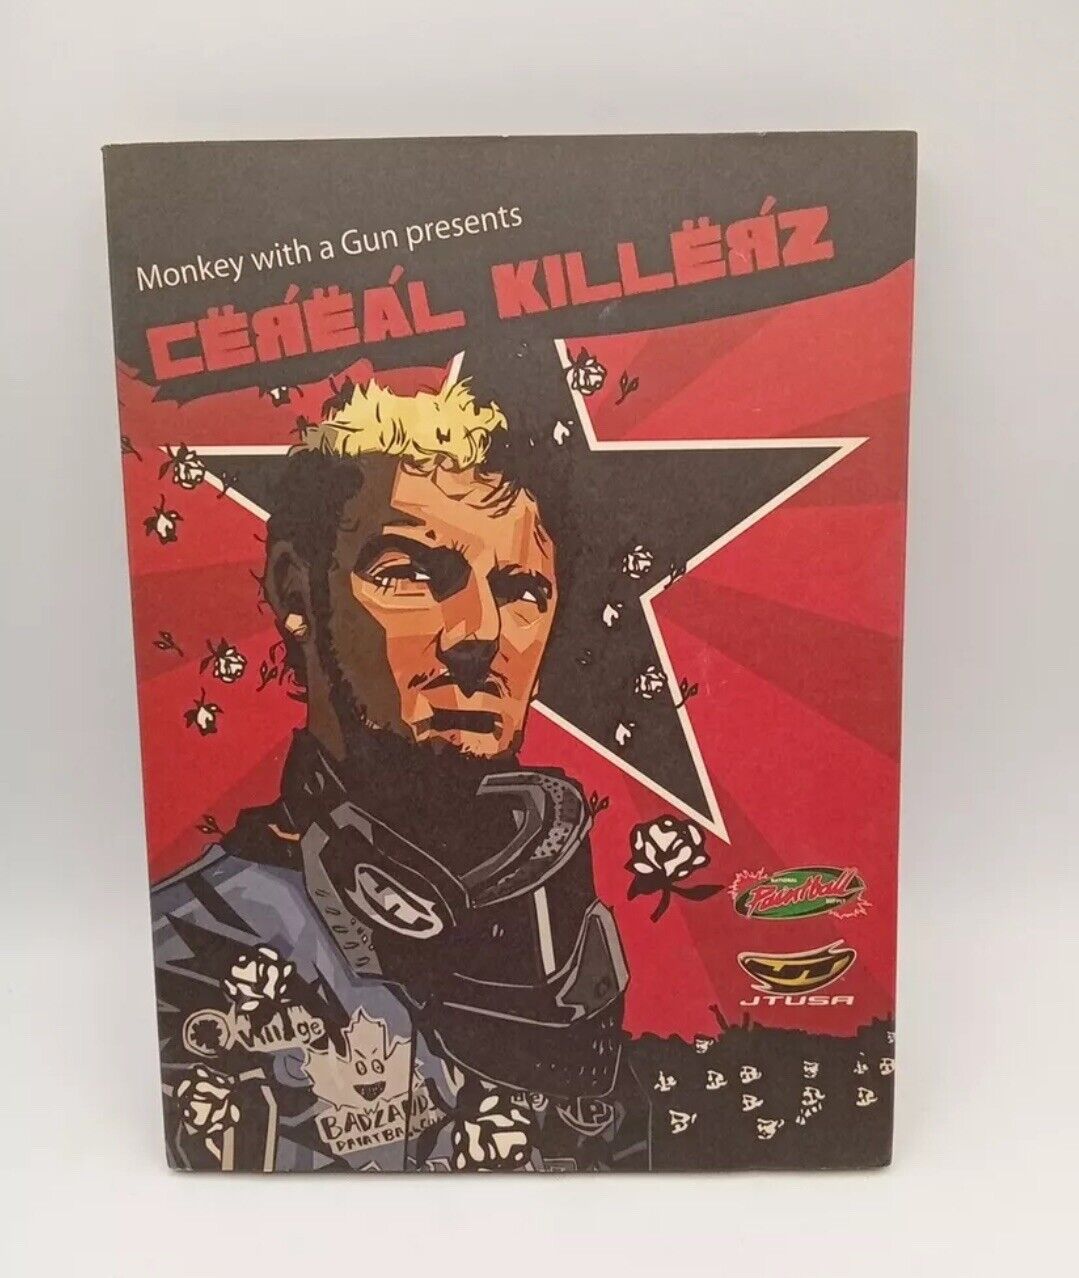 Cereal Killerz: Monkey with a Gun Paintball (DVD, 2005)